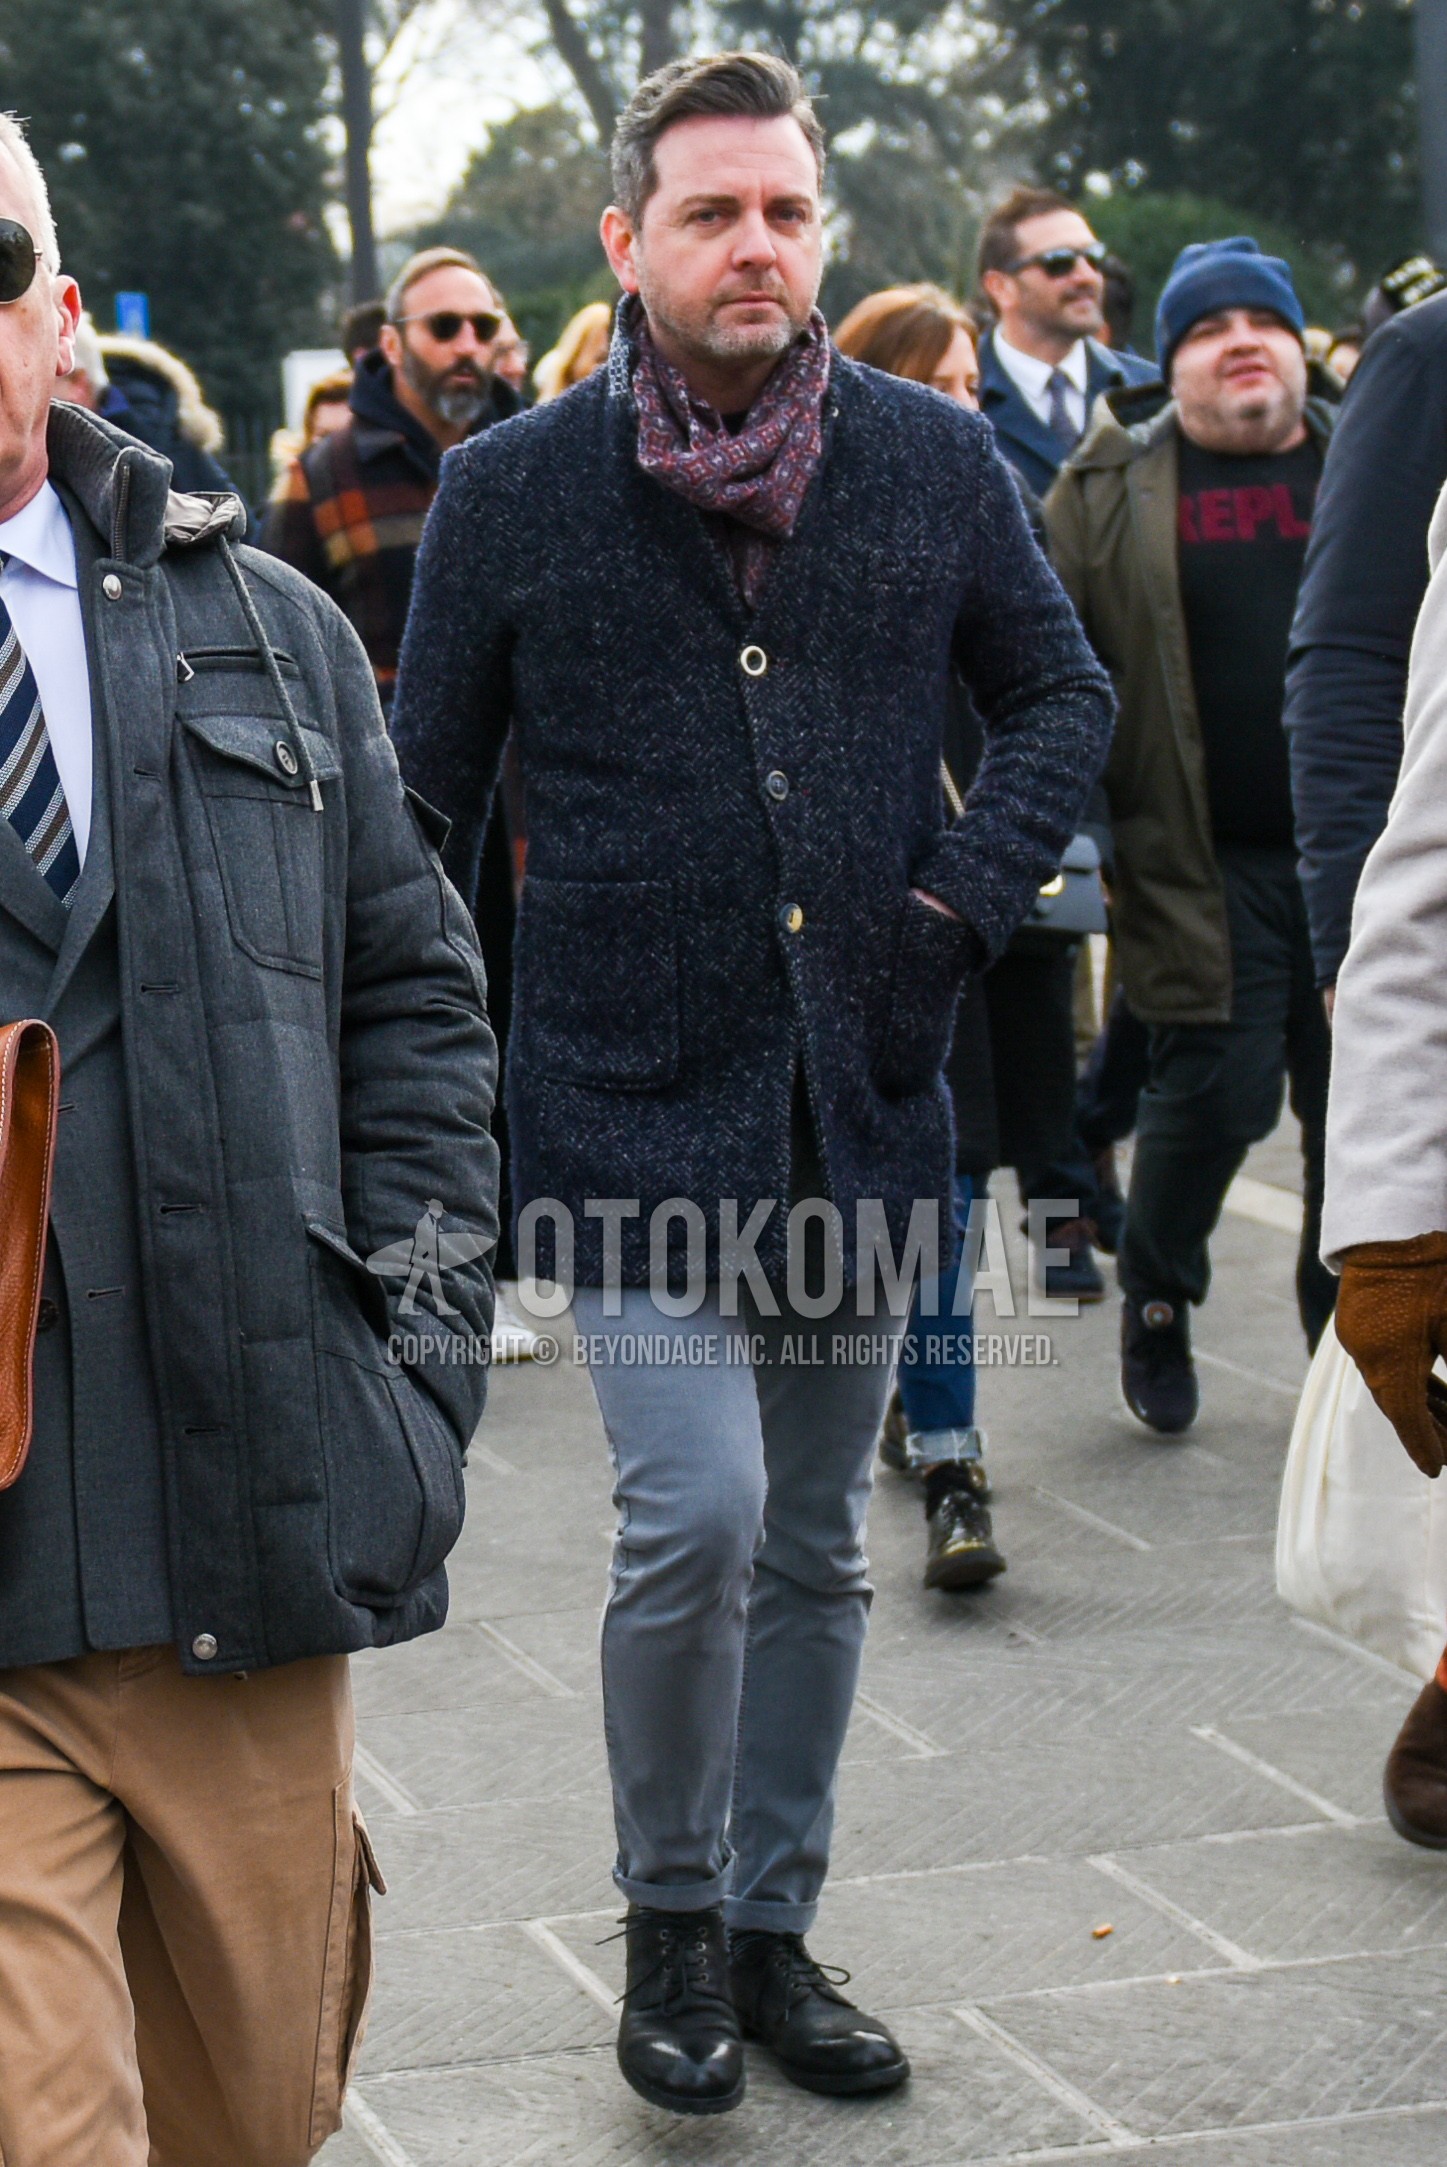 Men's autumn winter outfit with multi-color scarf scarf, gray outerwear chester coat, gray plain denim/jeans, black plain toe leather shoes.